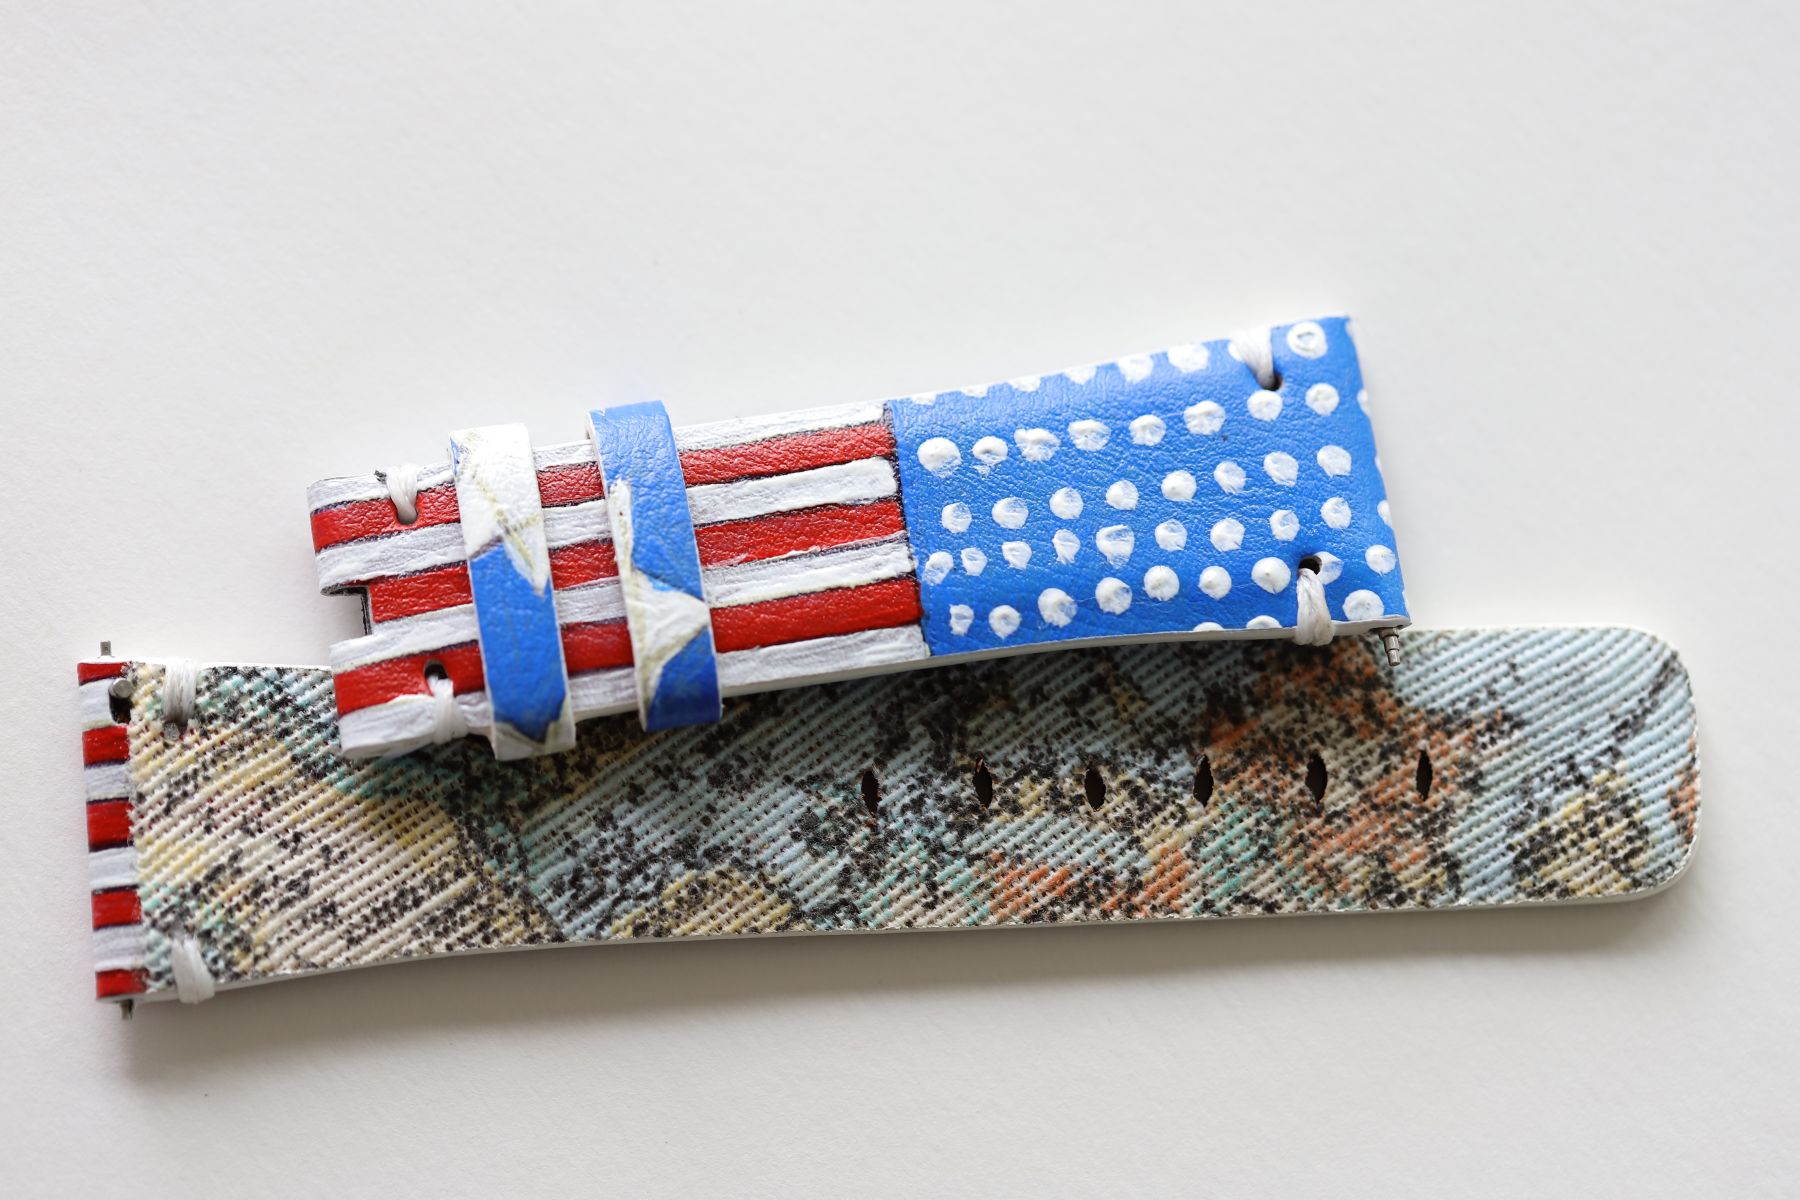 My Country USA: Hand-Painted Band for Apple Watch Inspired by NATIONAL FLAG of United States of America